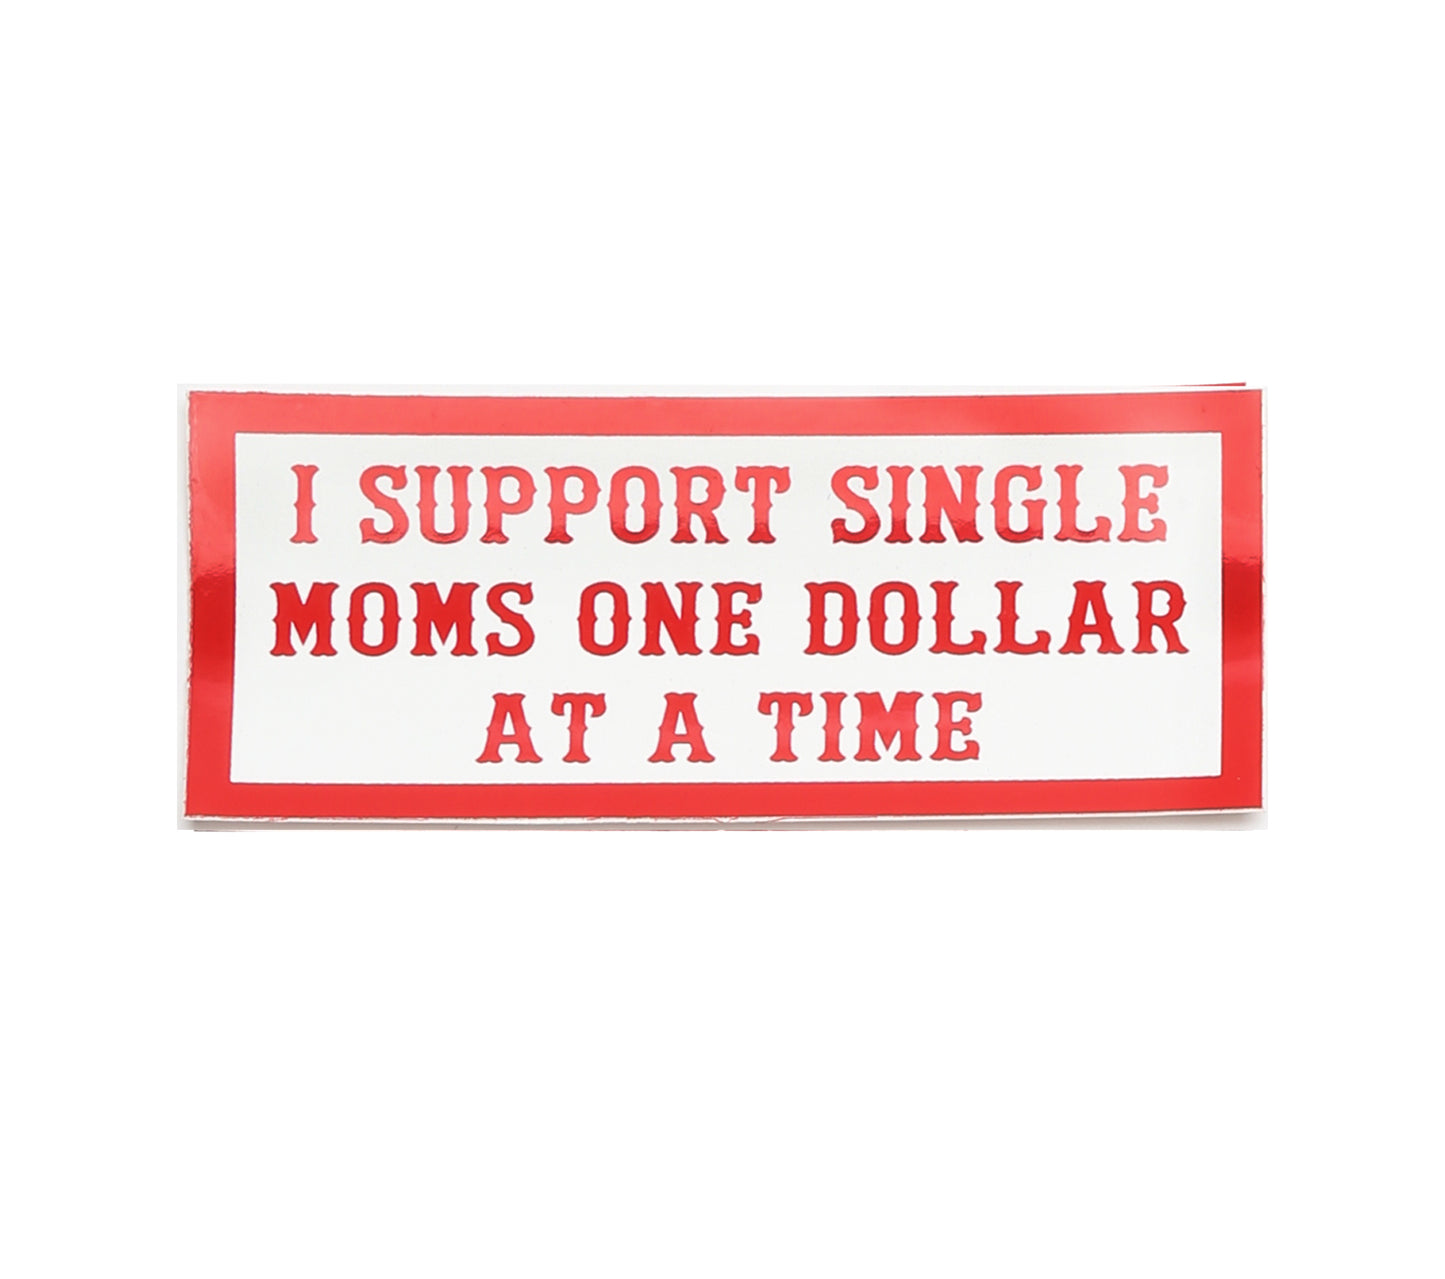 Sticker - I SUPPORT SINGLE MOMS ONE DOLLAR AT A TIME